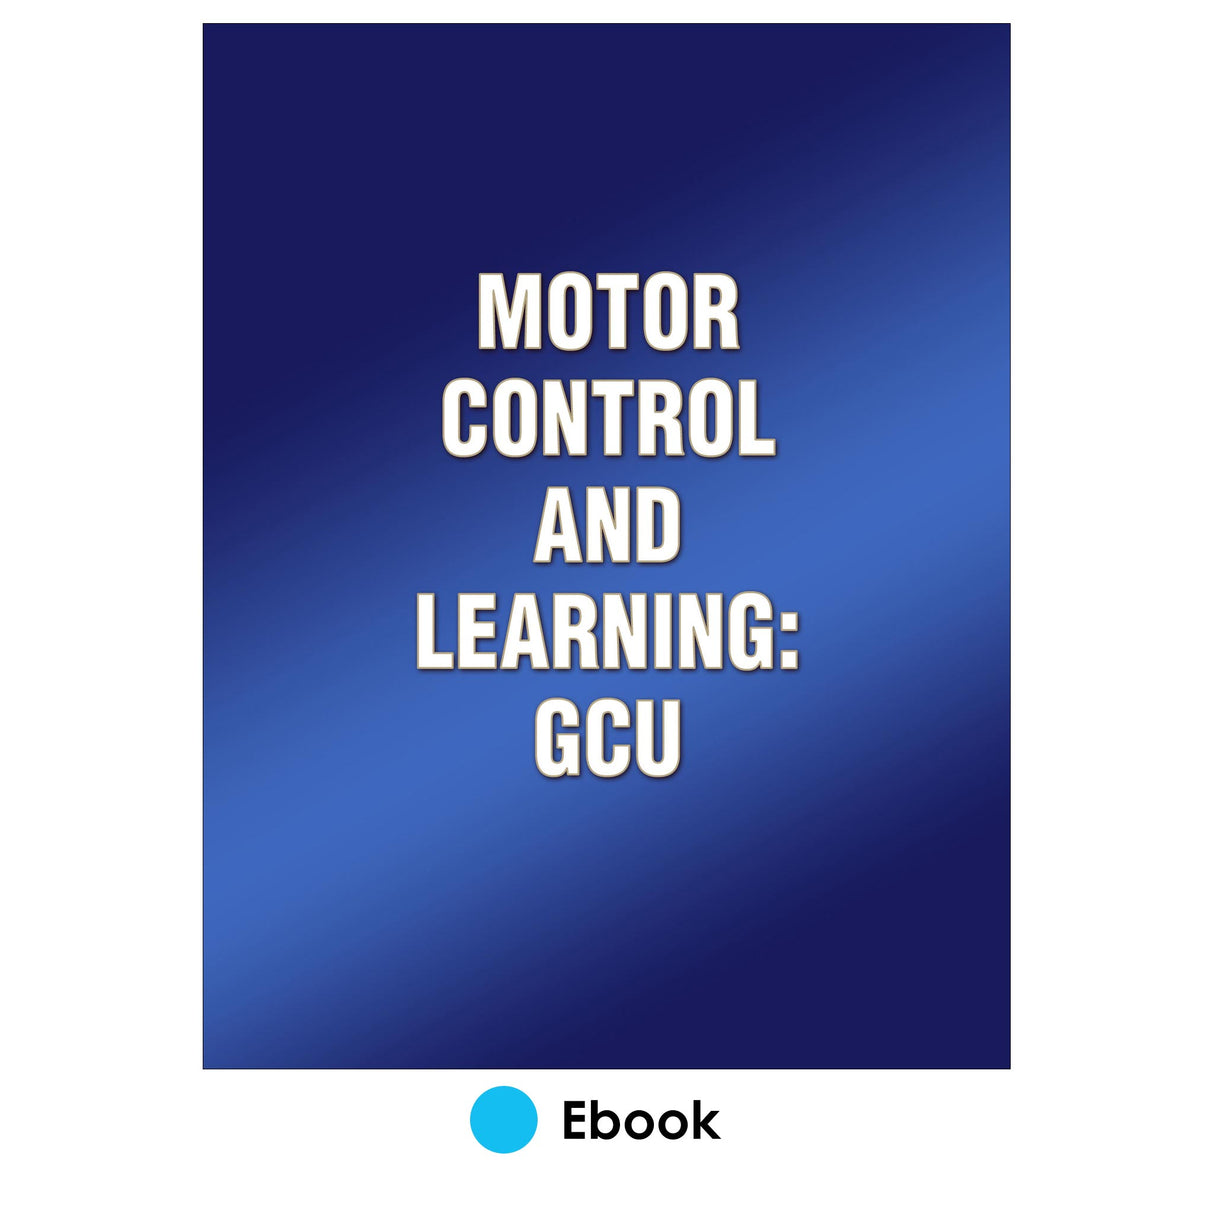 Motor Control and Learning: GCU